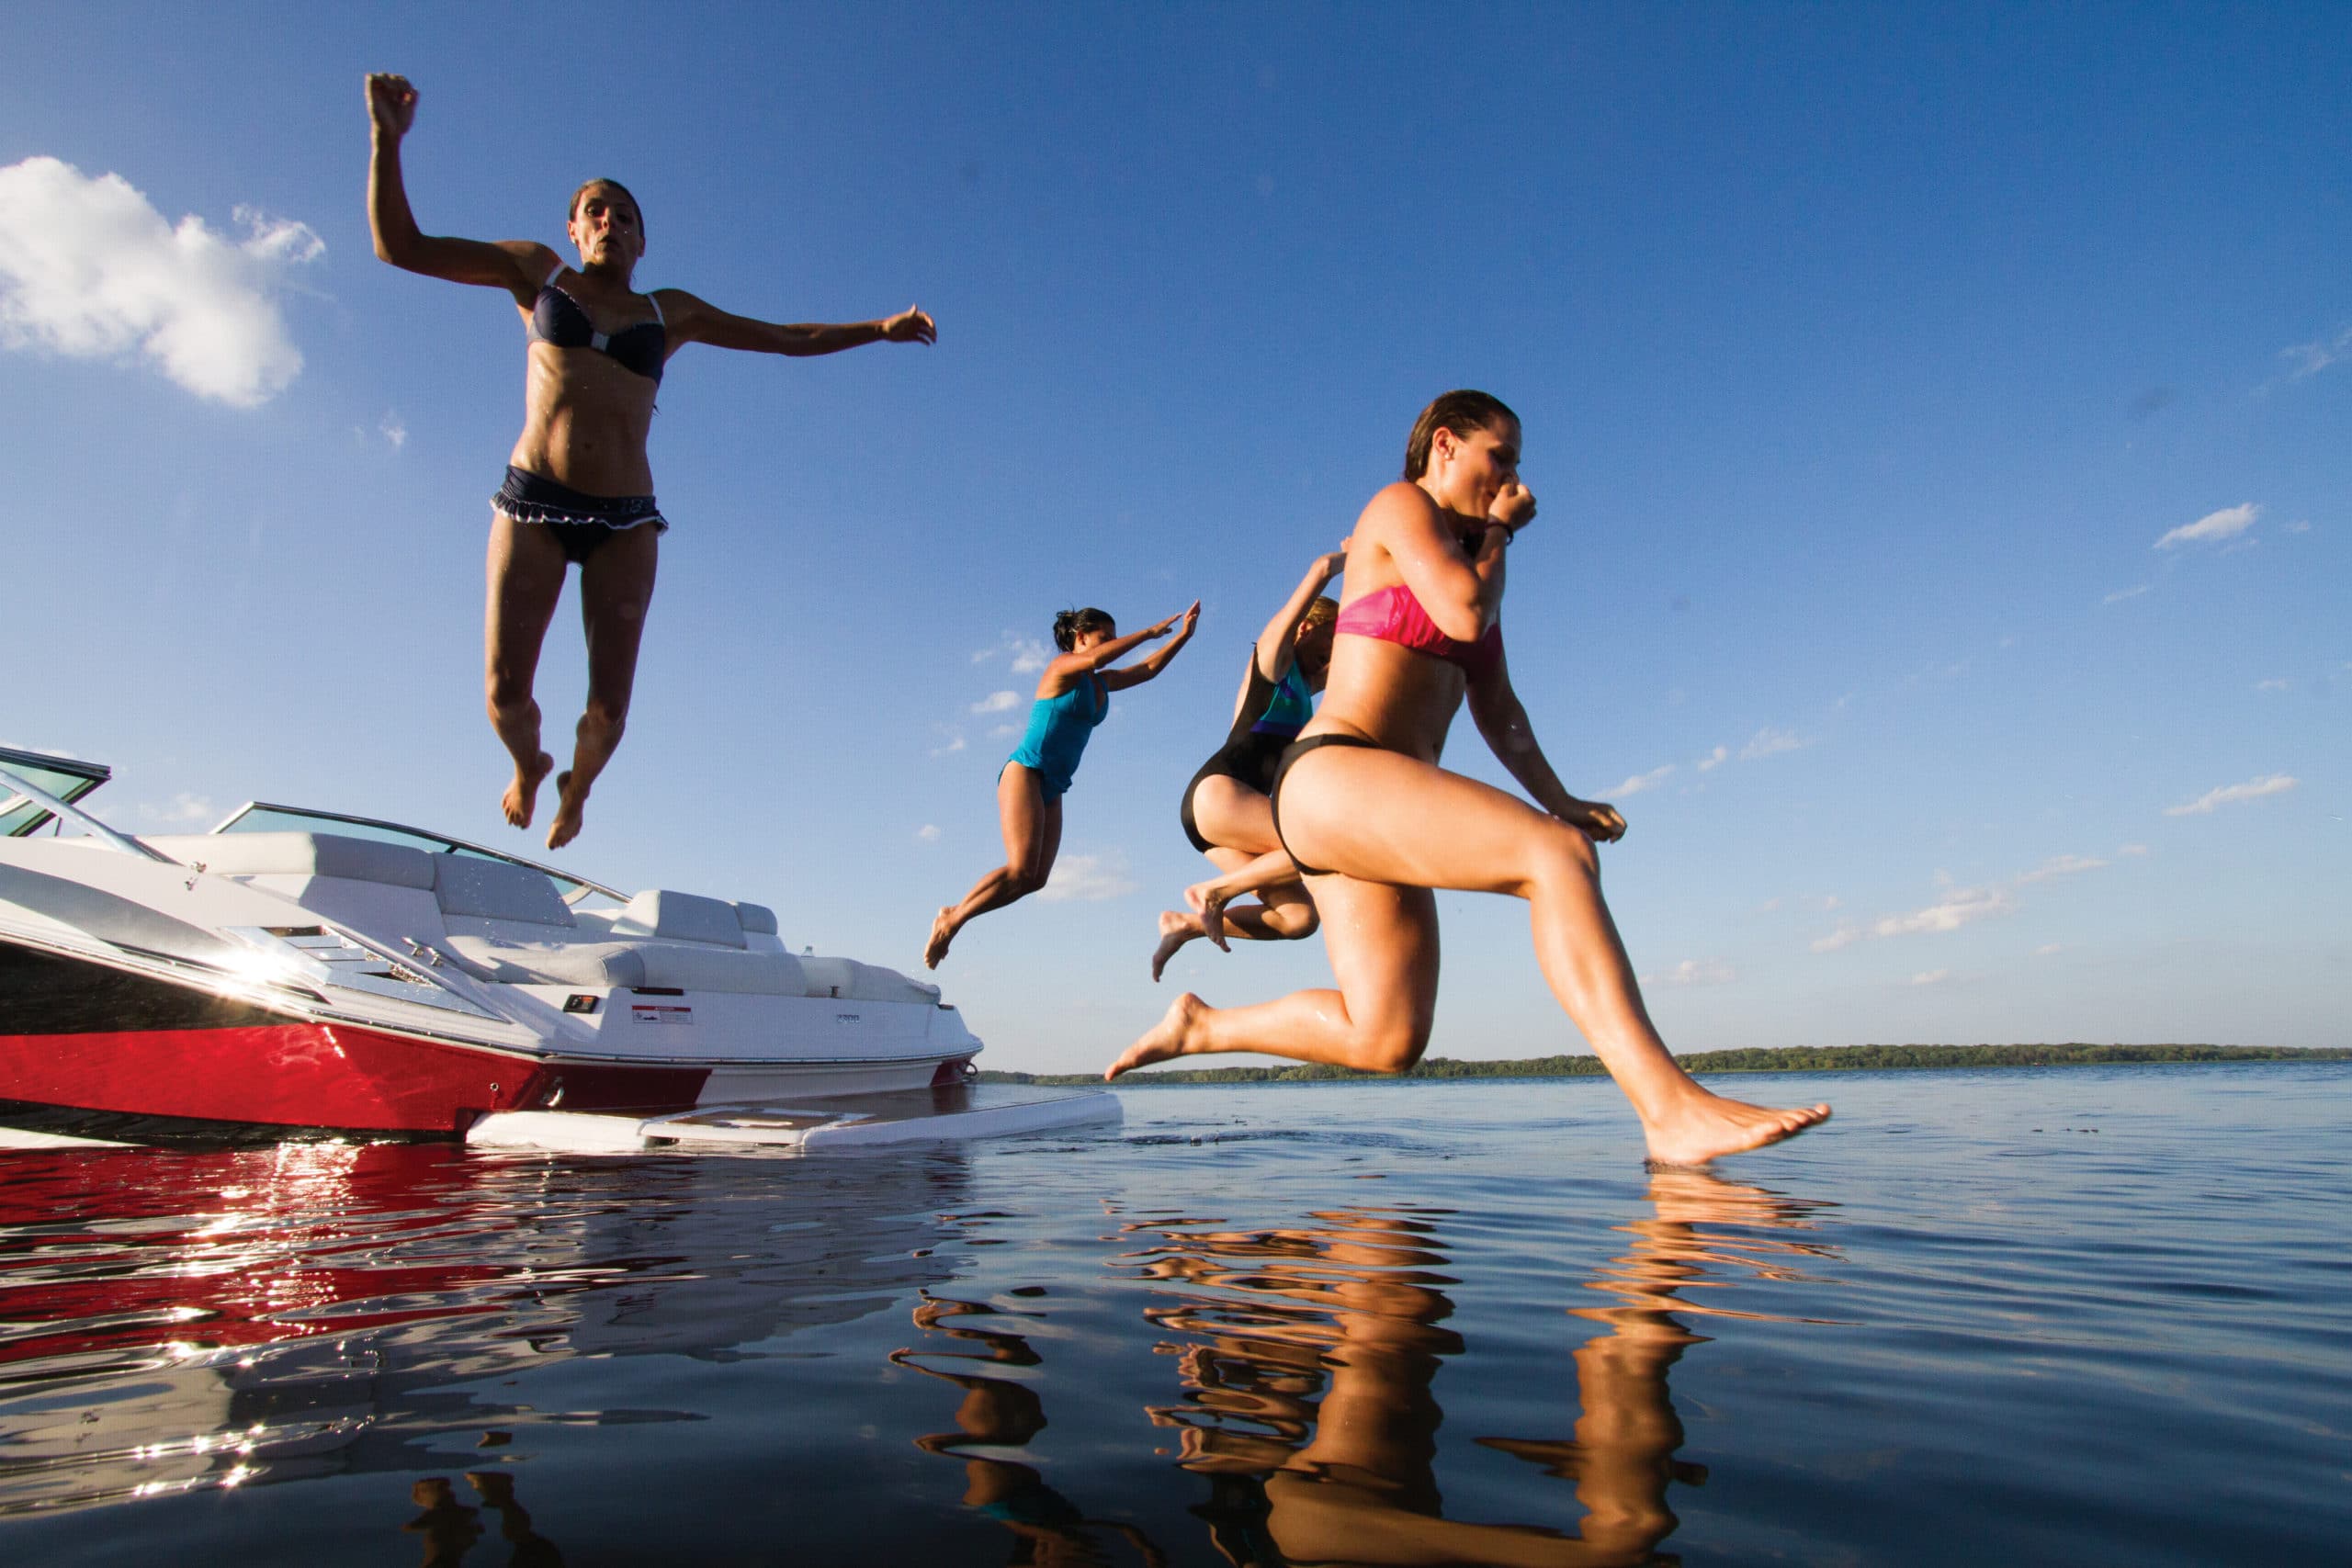 kids jumping into water from boat